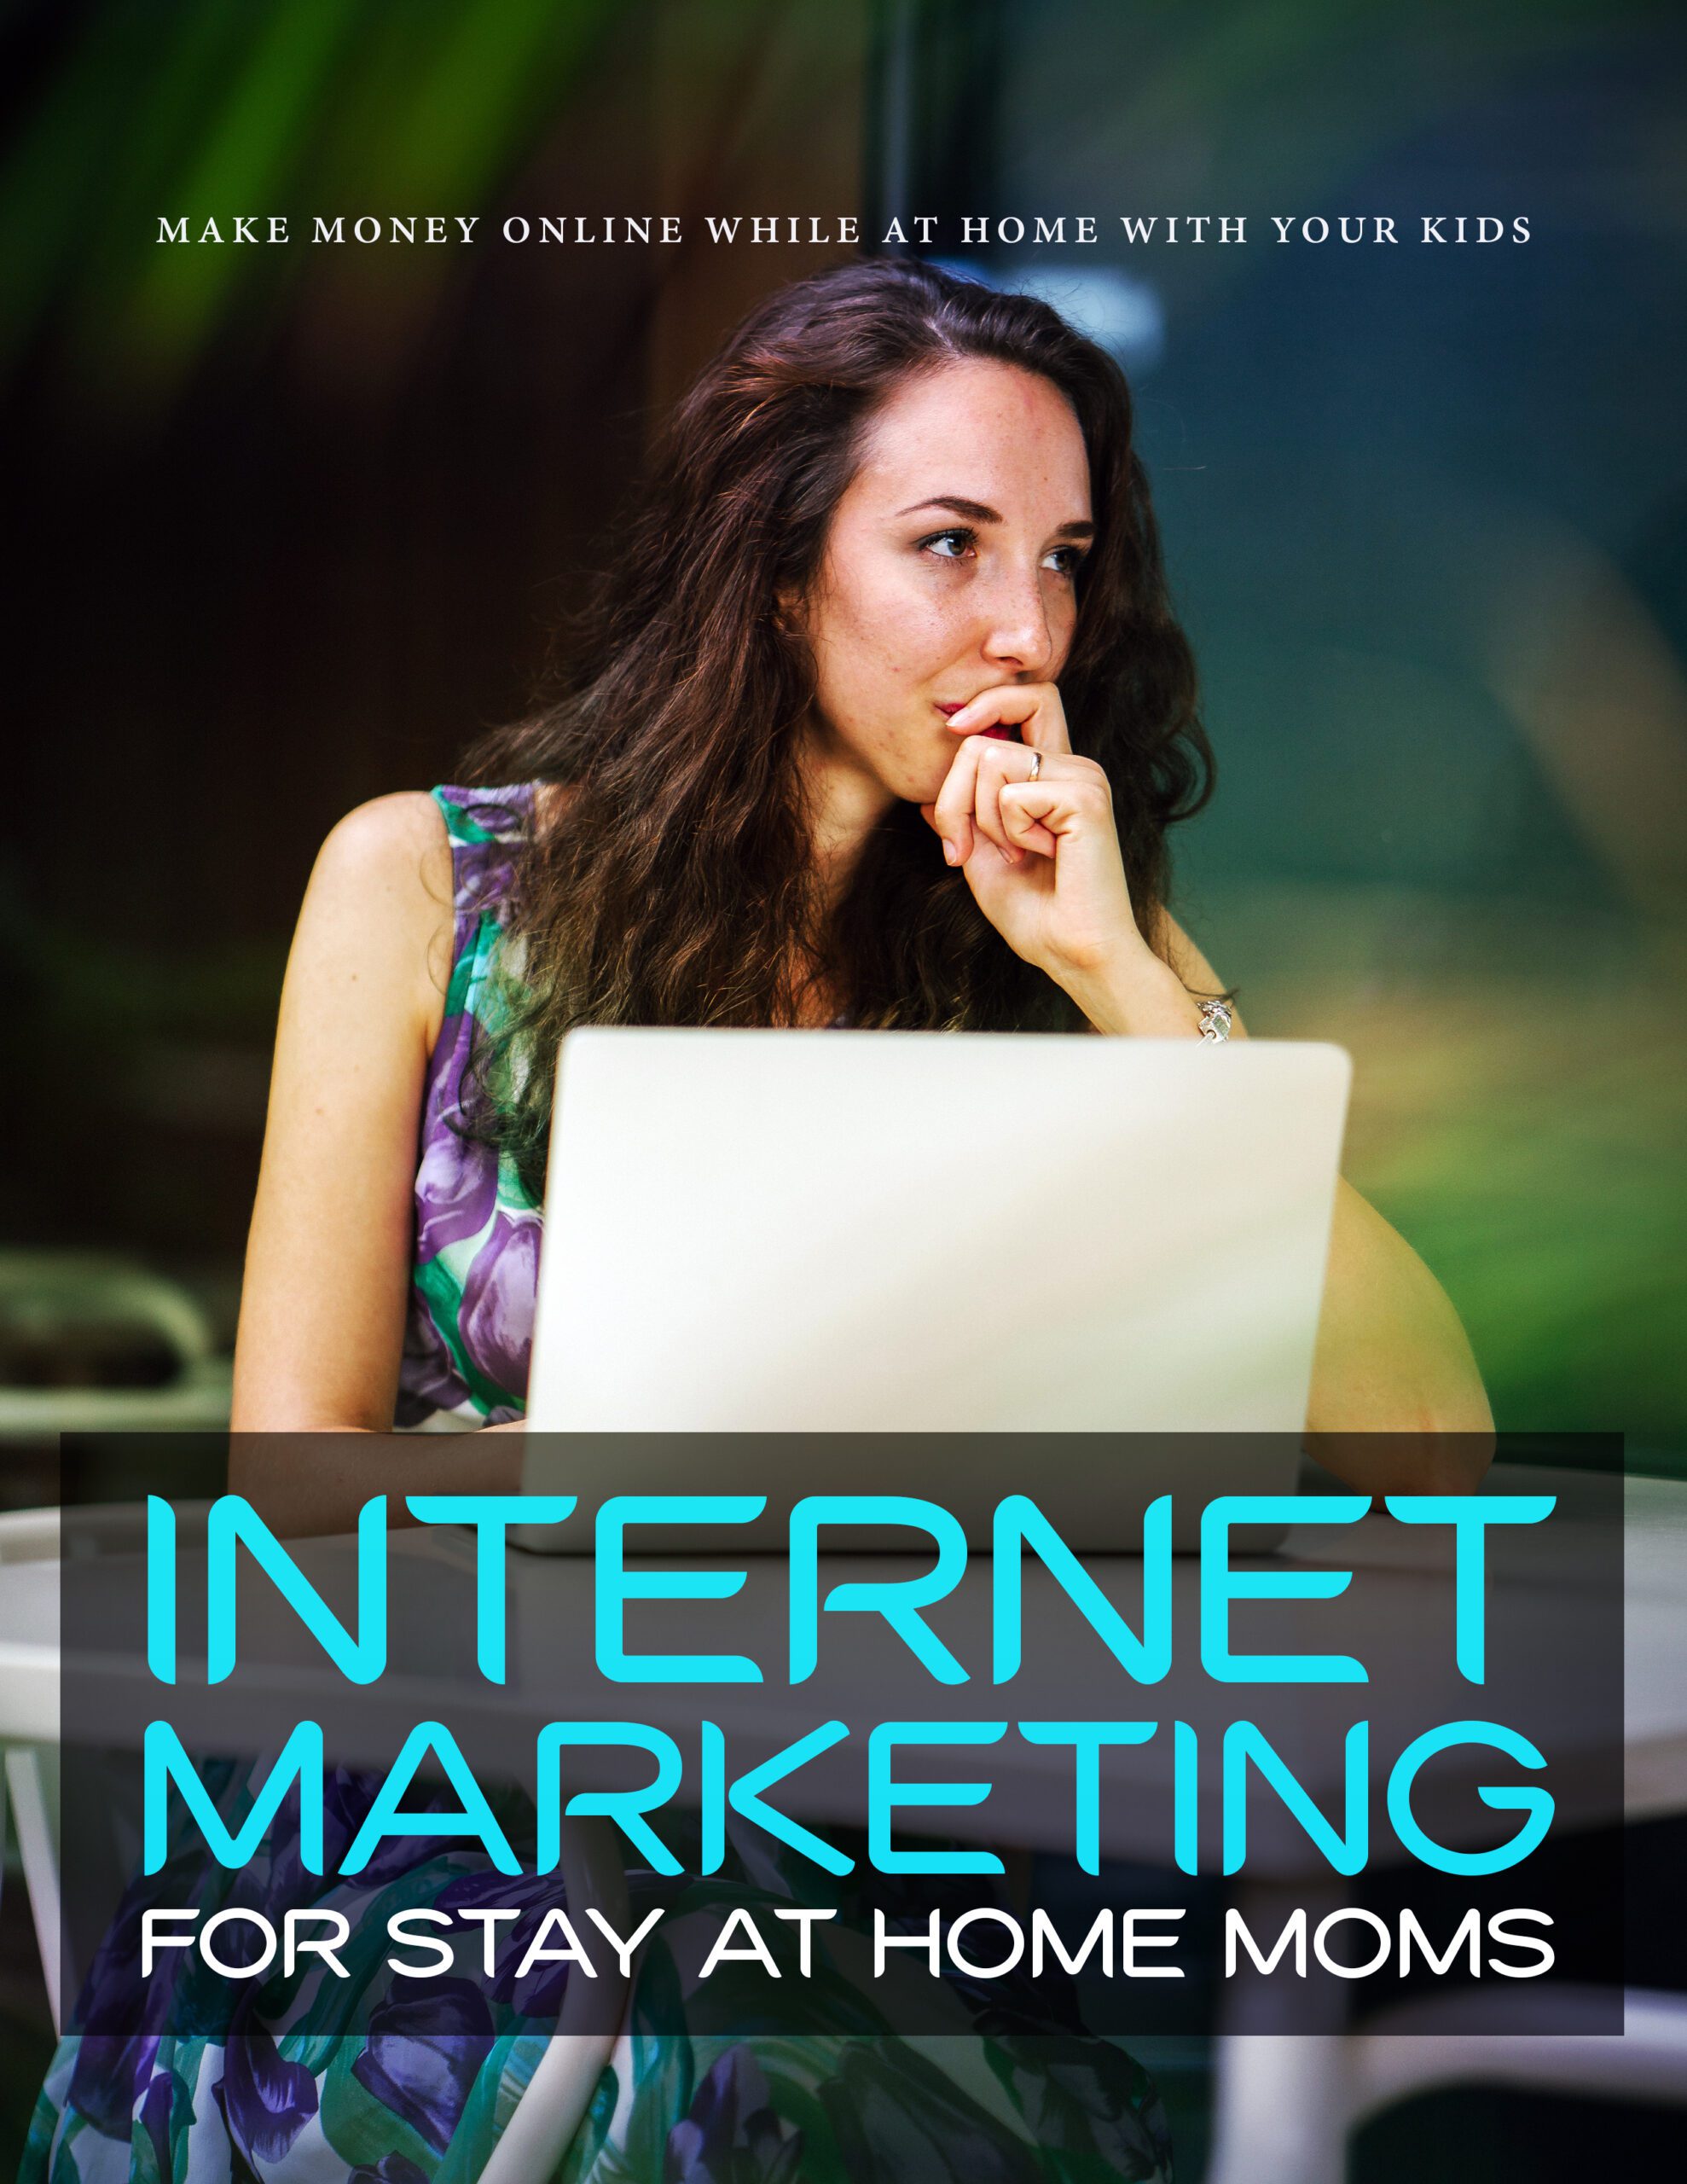 Cover of 'Internet Marketing Success for Stay-at-Home Moms,' showcasing the guide for moms to succeed in internet marketing.